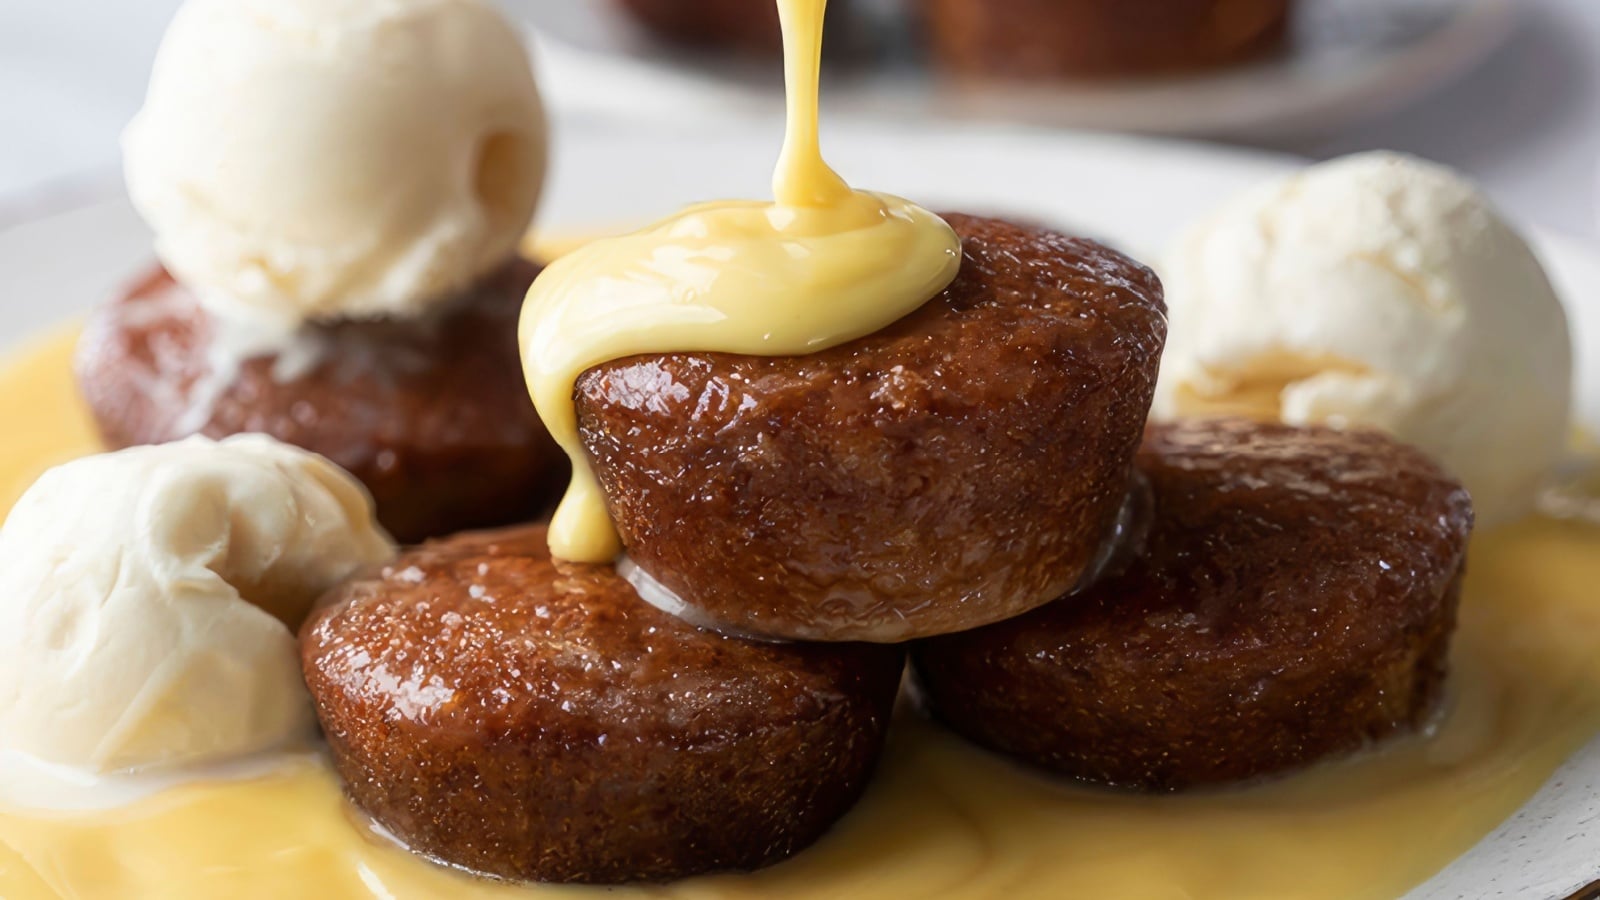 <p><span>Malva pudding is a sweet, moist cake that is a popular dessert in South Africa. It’s made with apricot jam and topped with a creamy custard sauce, making it a rich and indulgent treat. You can find it at street vendors and restaurants throughout the country.</span></p><p><span>Even though it’s a dessert, it’s not uncommon to see locals enjoying a serving of Malva pudding any time of the day, proof of how beloved this dish is. Each mouthful promises a taste of South African hospitality and a reminder of the simple yet profound joy of joining in a shared love for food. </span></p>